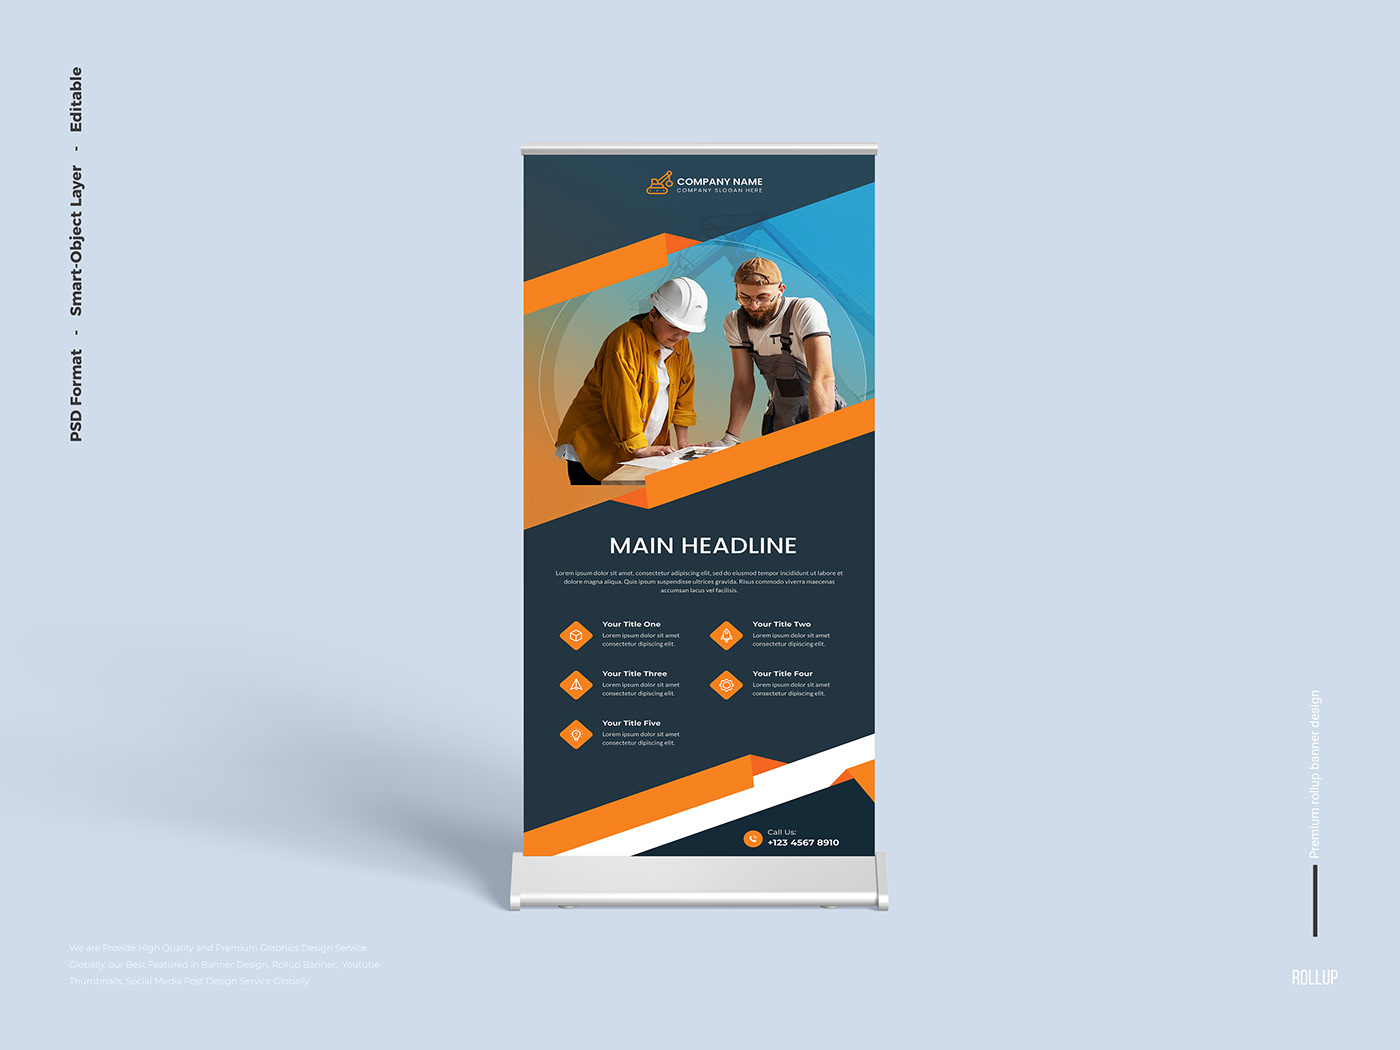 roll up banner size
Roll up banner design template free
Roll up banner design template
Roll up banne